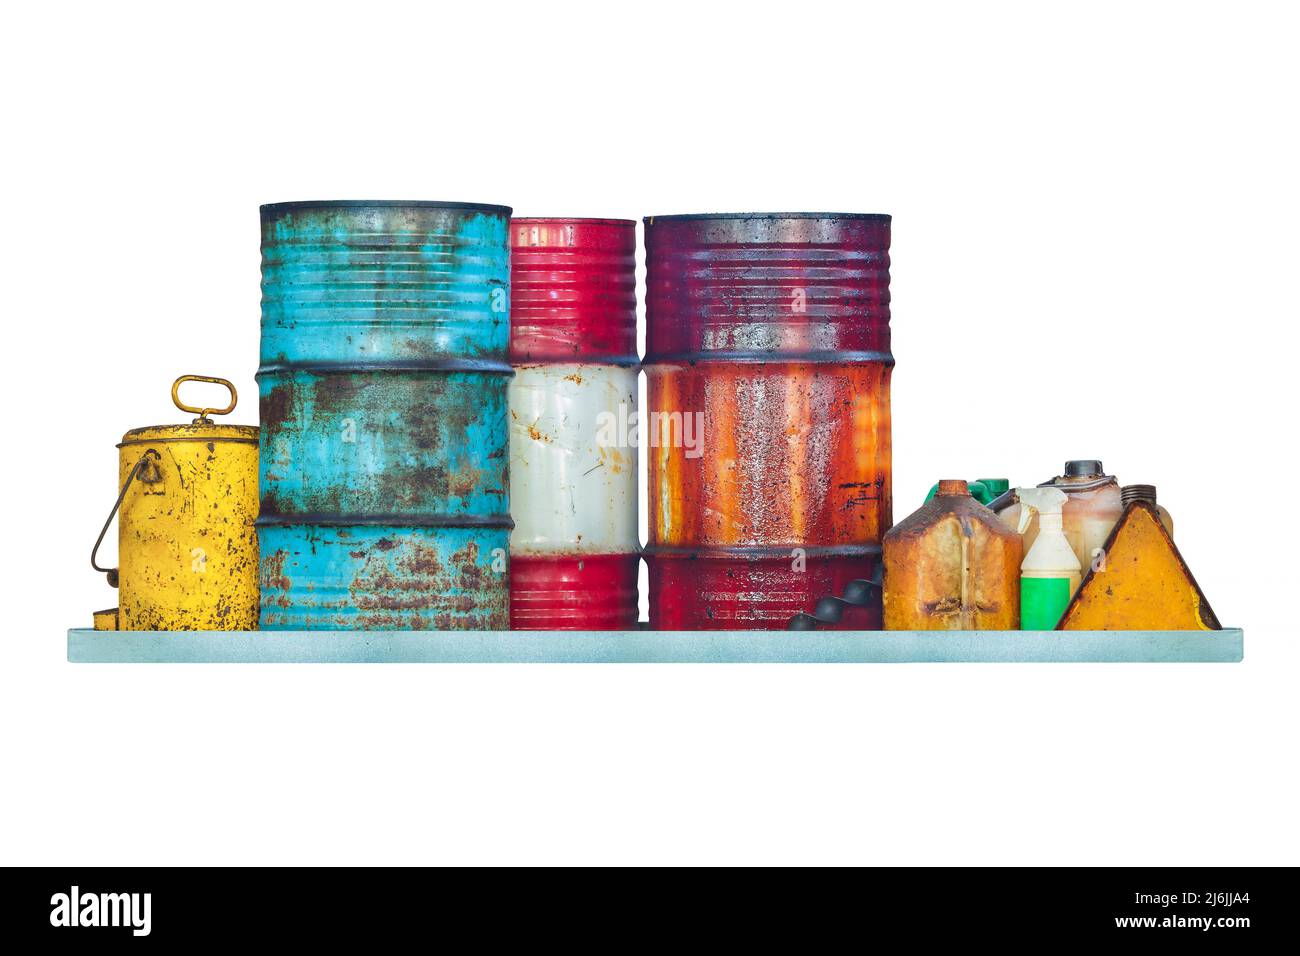 Assortment of chemical waste barrels and containers isolated on a white background Stock Photo